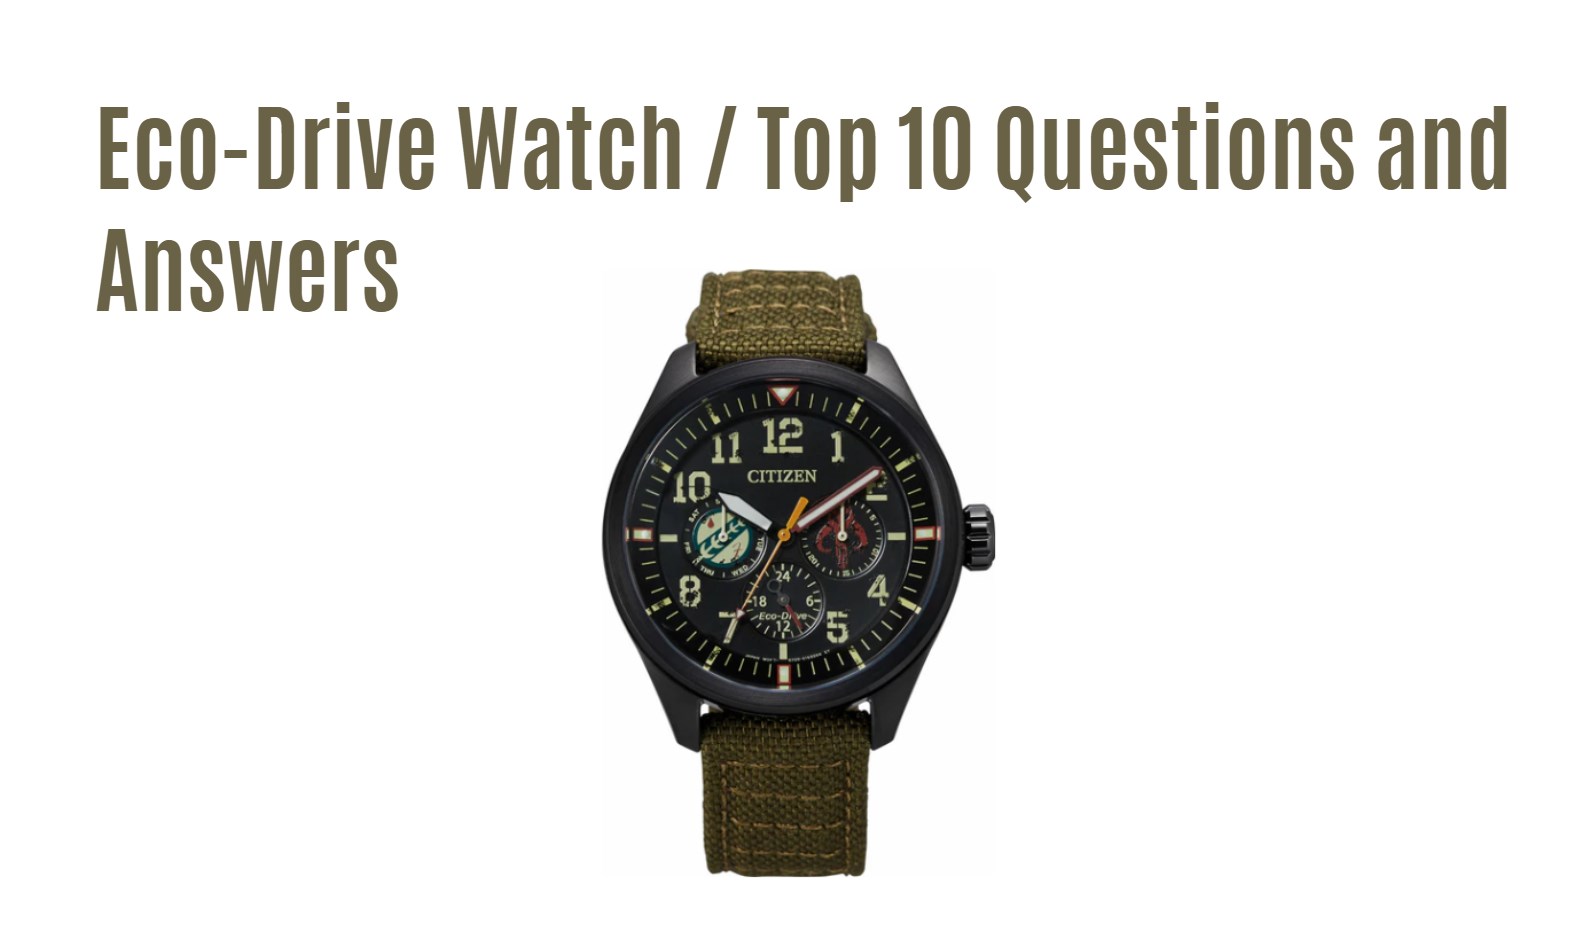 Top 10 Questions and Answers: